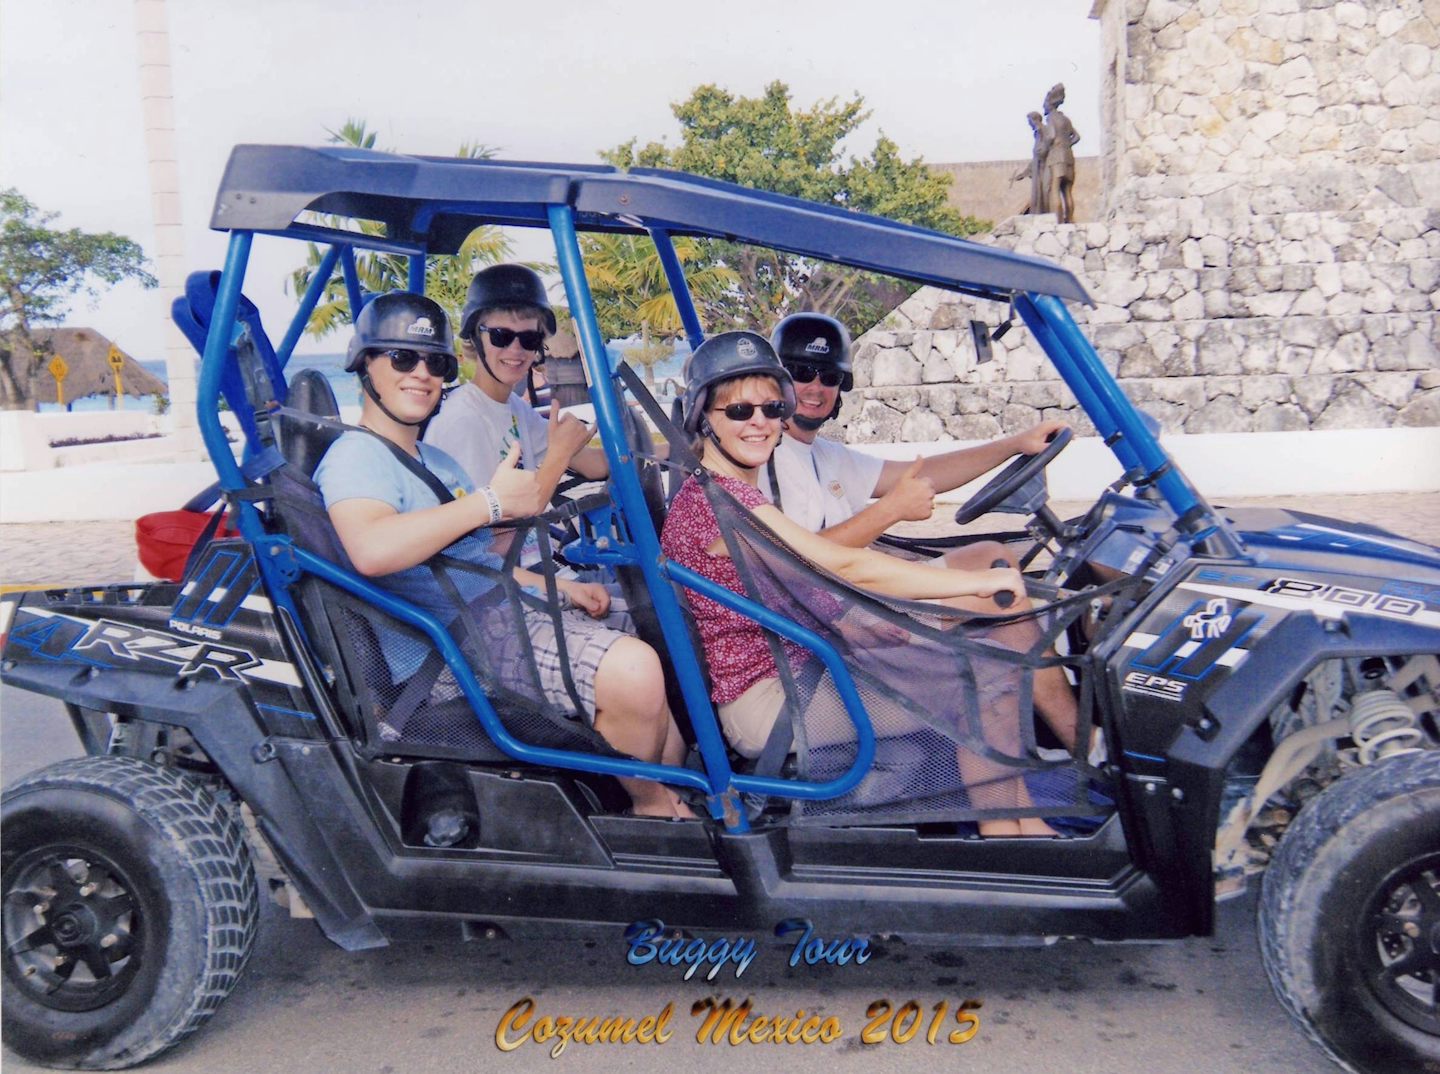 I never wanted to take a cruise. Ever. Then my parent took us on one in 2001 to celebrate their 50th anniversary. Wow, was I wrong.

This picture is our family with 2 of our 3 boys on a Cozumel dune buggy excursion while enjoying a 7-day Western Caribbean on Royal Caribbean